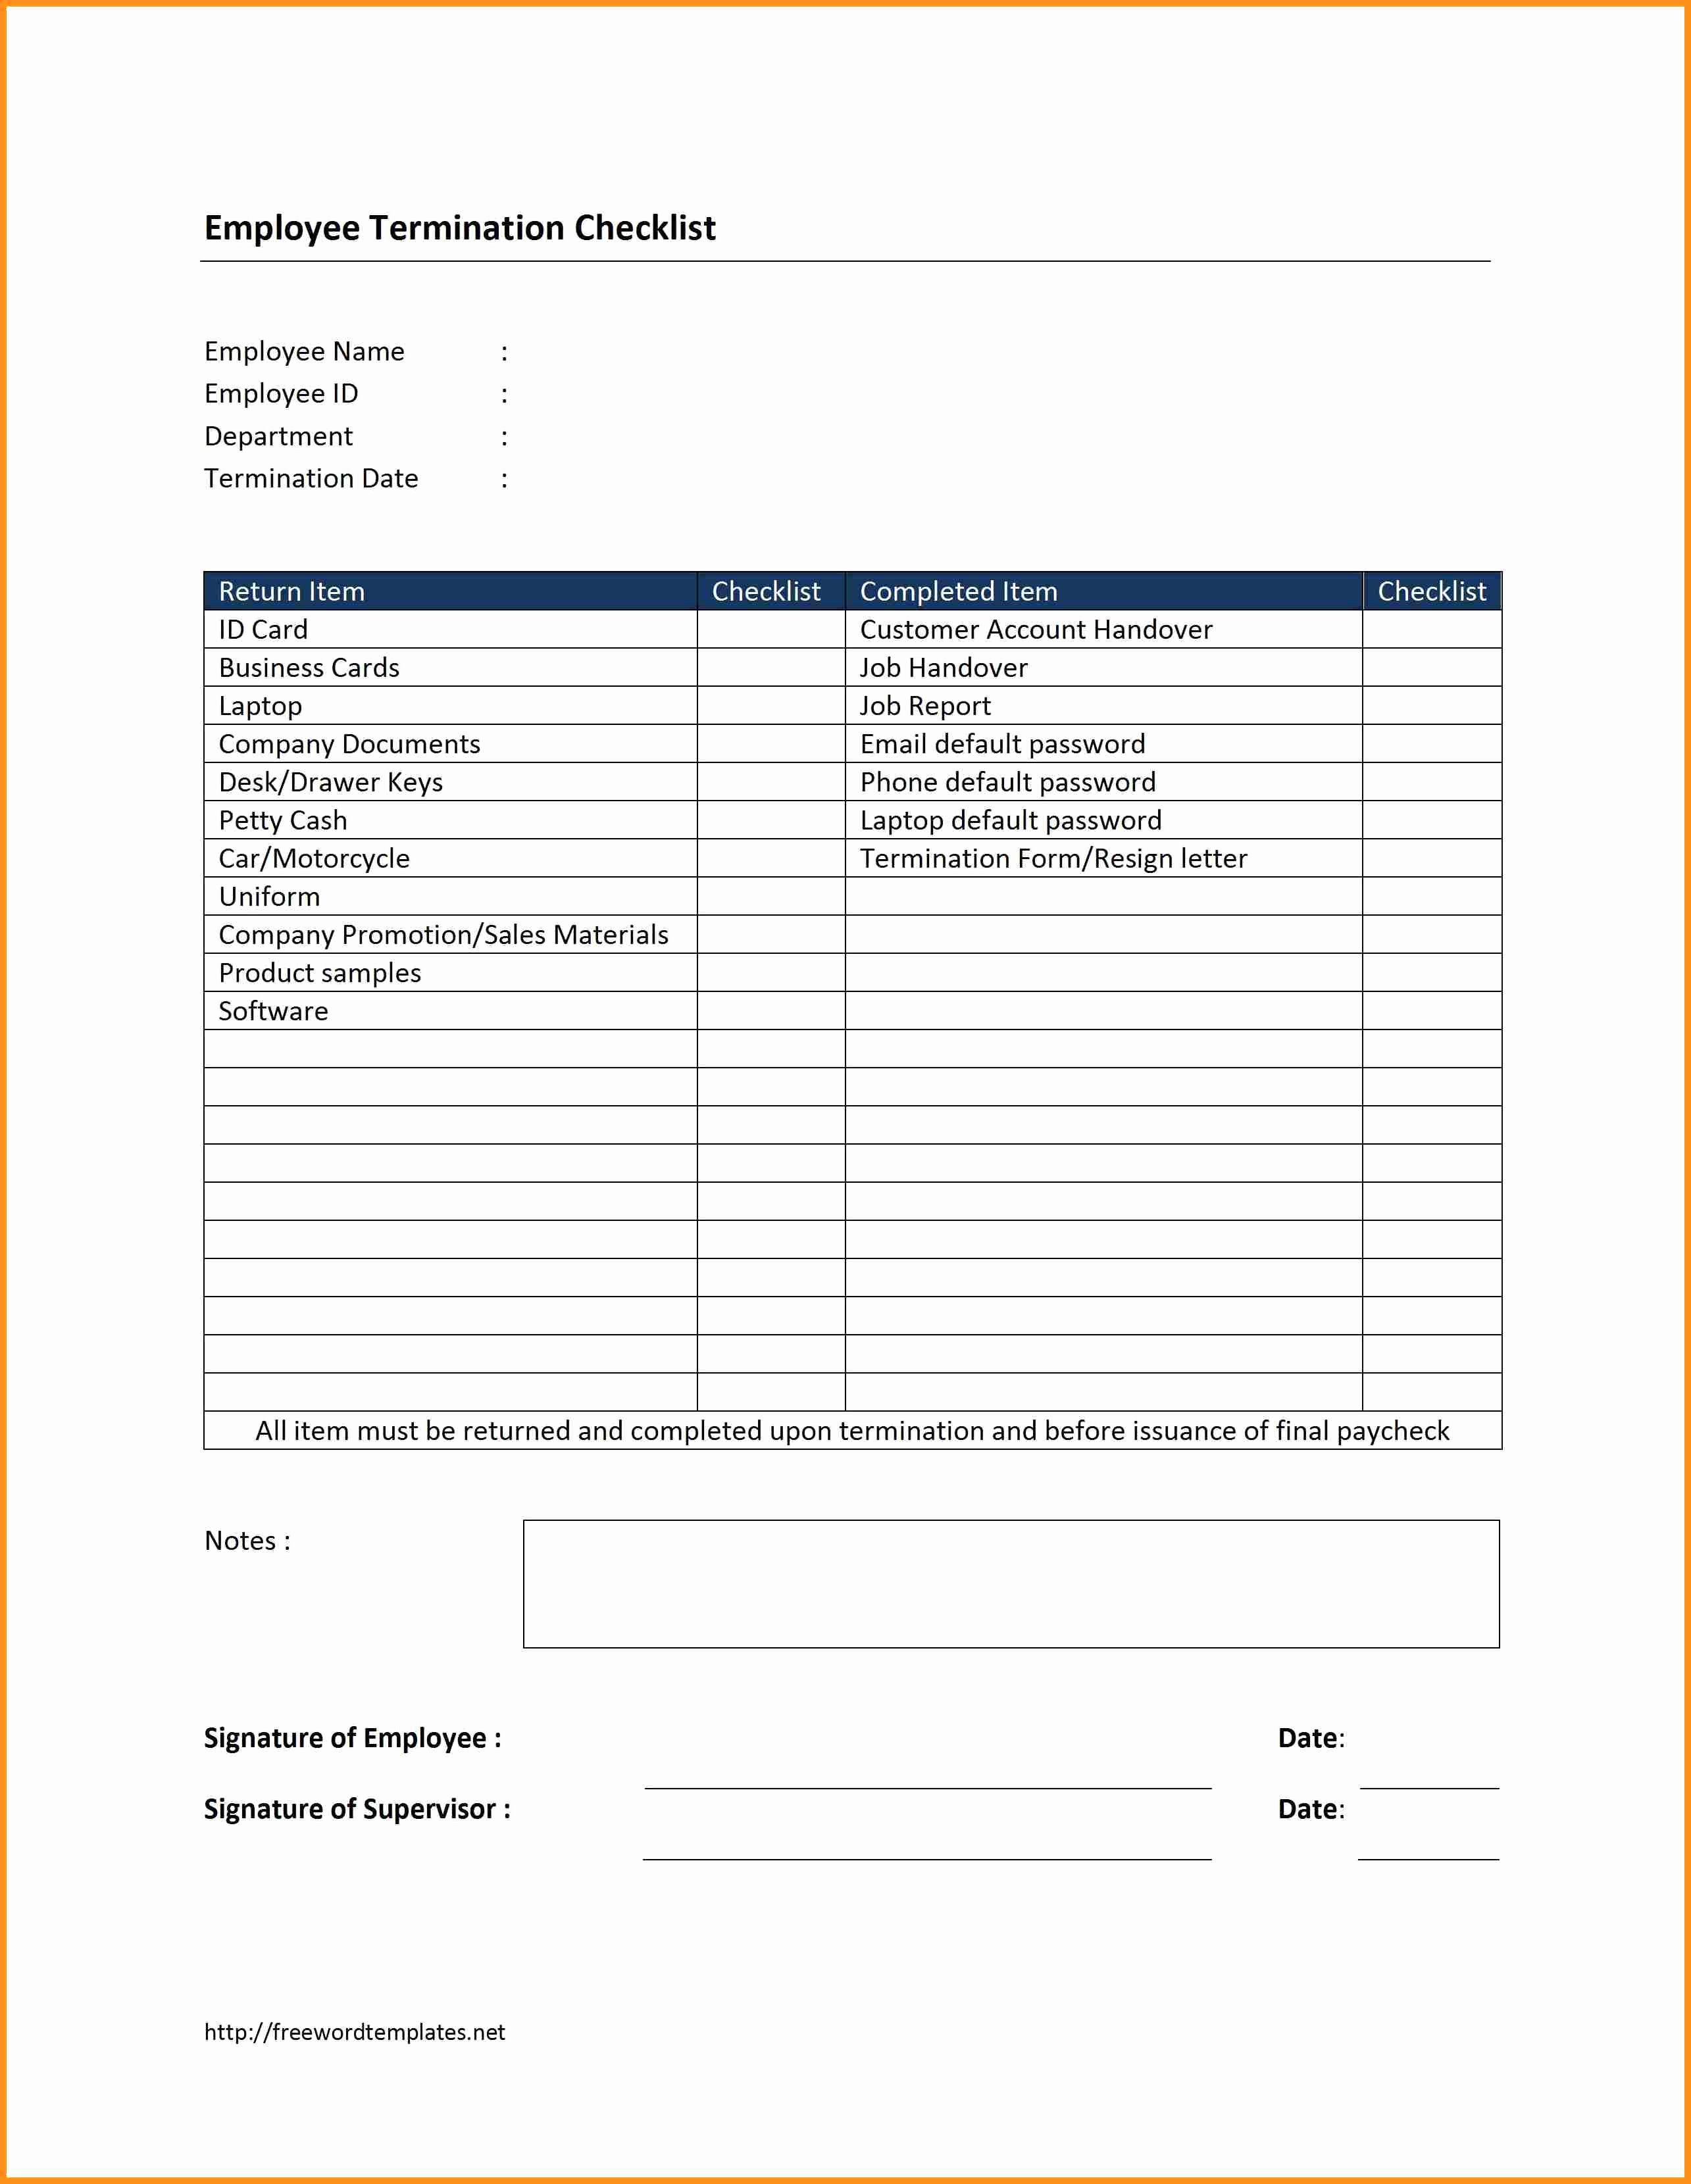 Employee Separation form Template Inspirational Employee Separation form Template Portablegasgrillweber